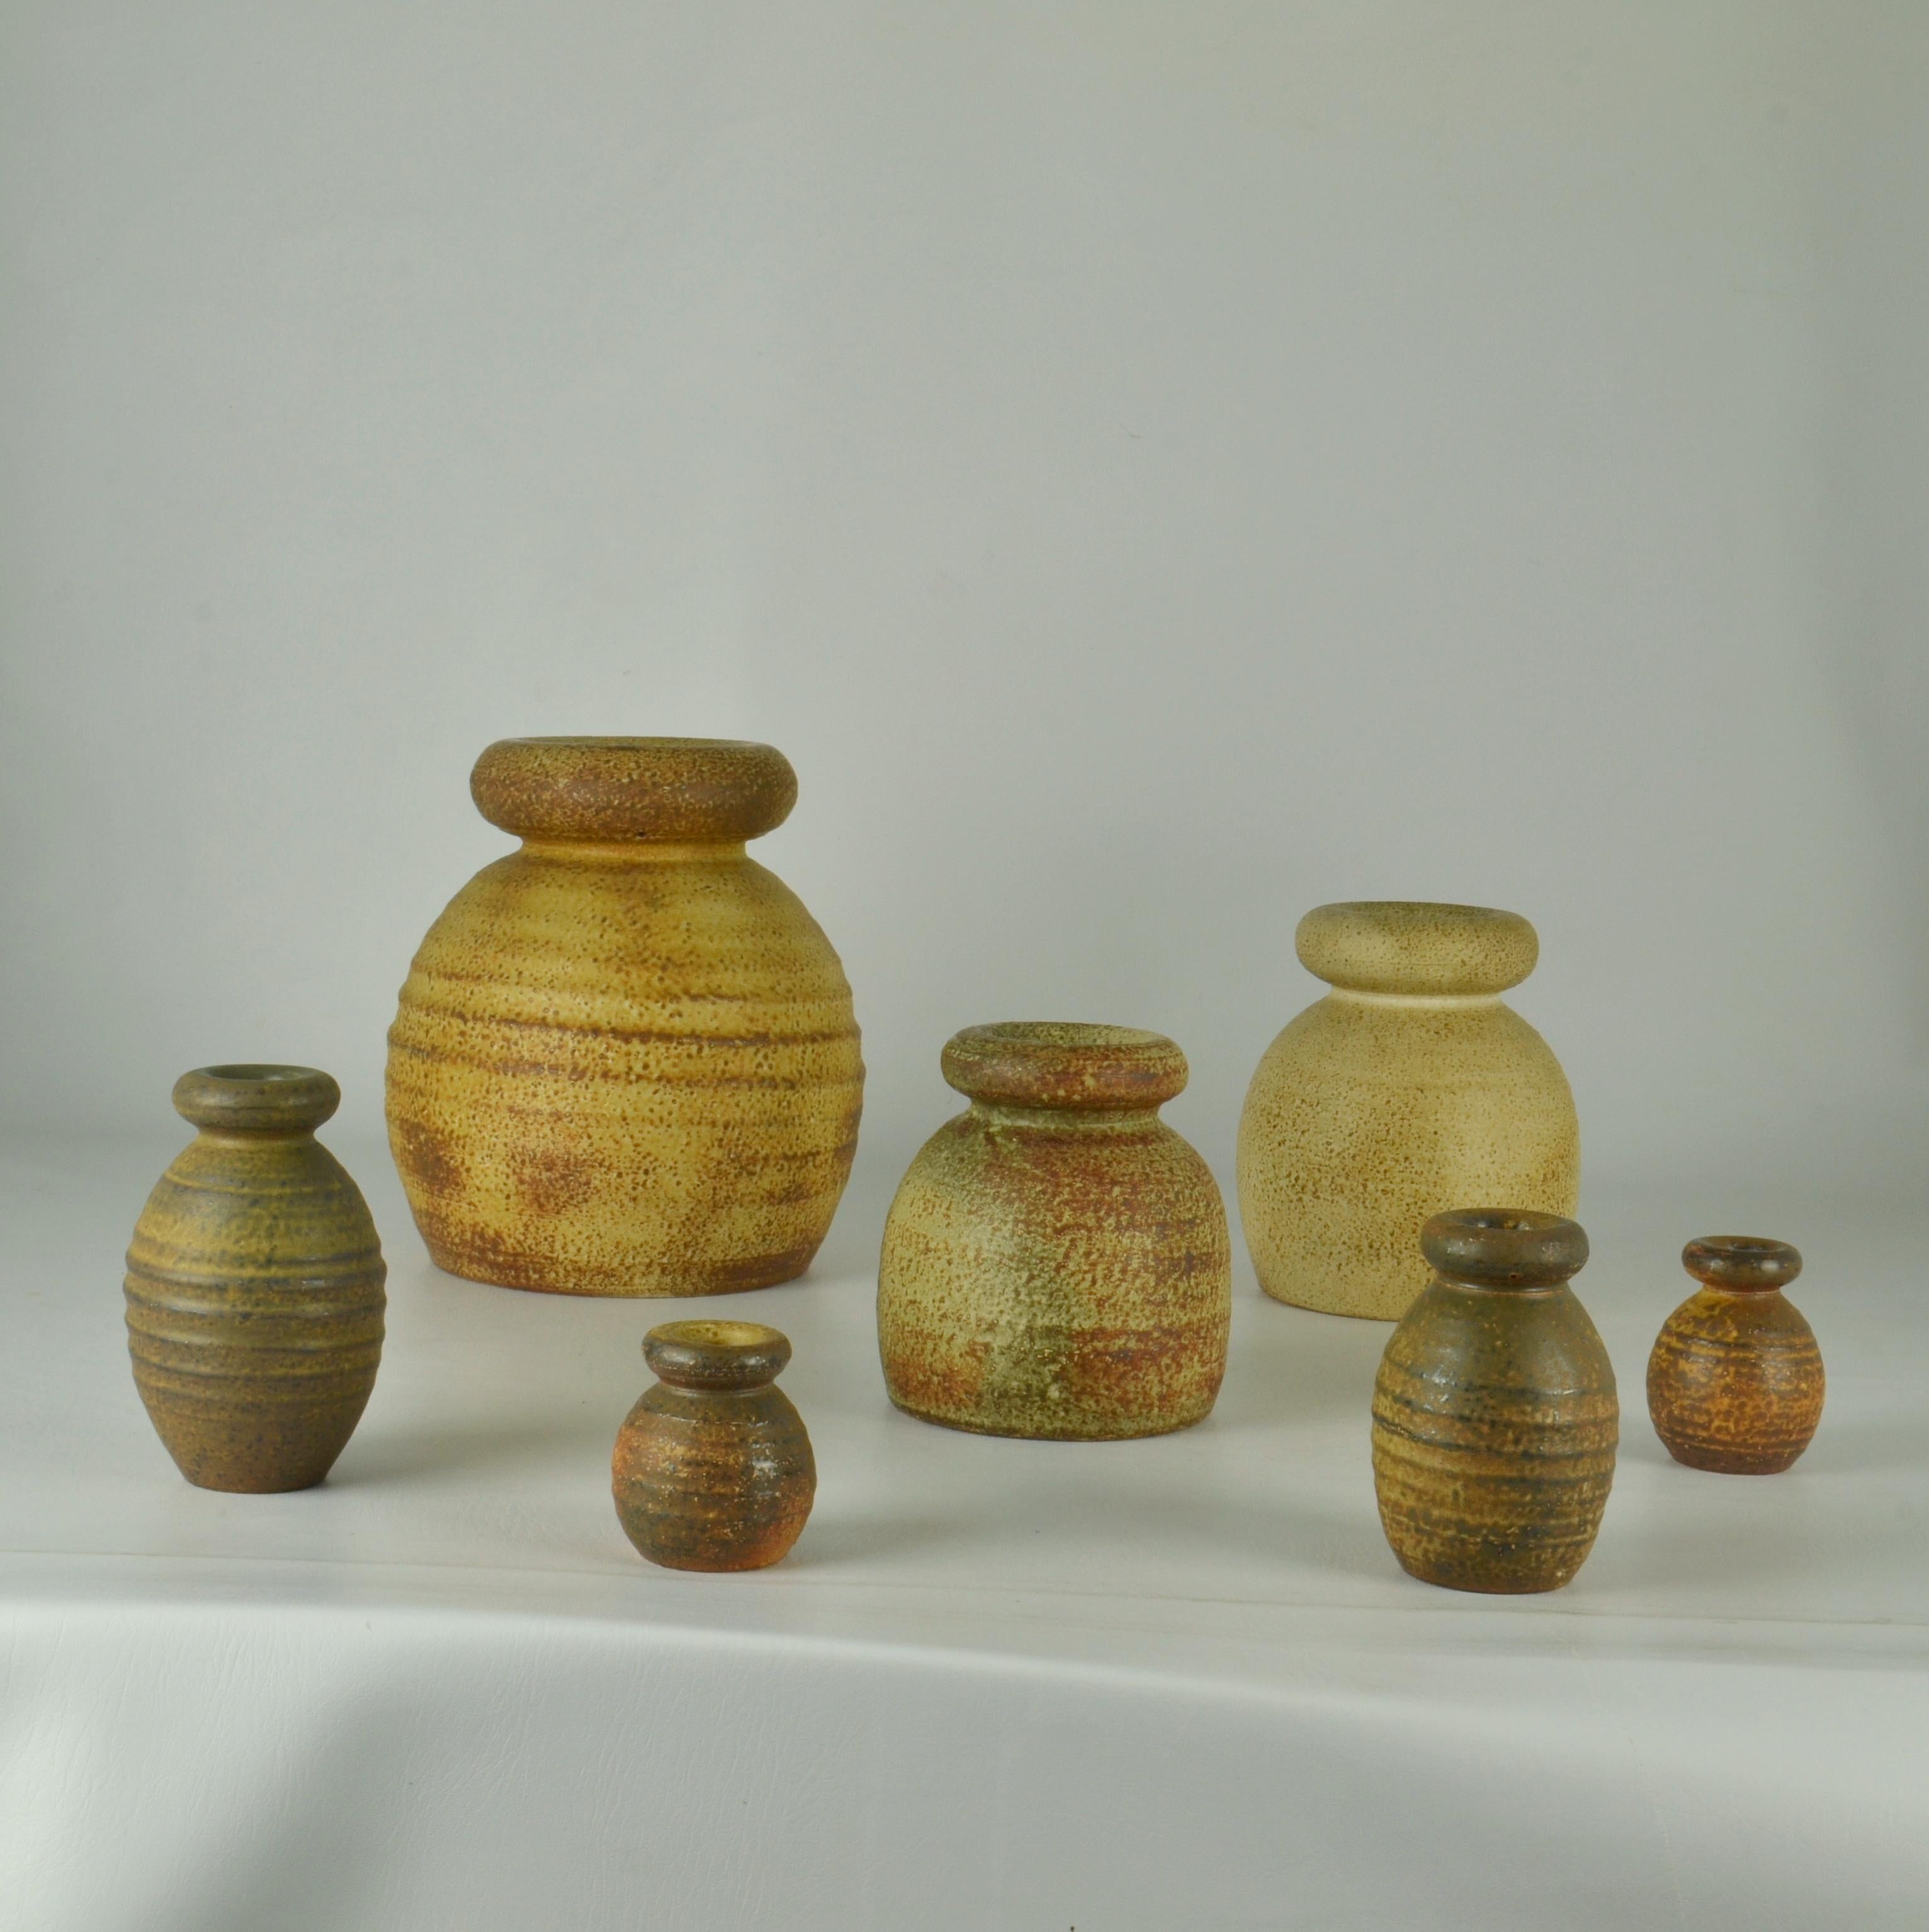 Set of seven Studio Pottery turned bulbous vases with rolled tire-shape necks Mid-Century Modern, glazed in ocher and natural earth tones and in various heights by Mobach's Dutch ceramist Piet Knepper are made in the 1970s. The glazes made of